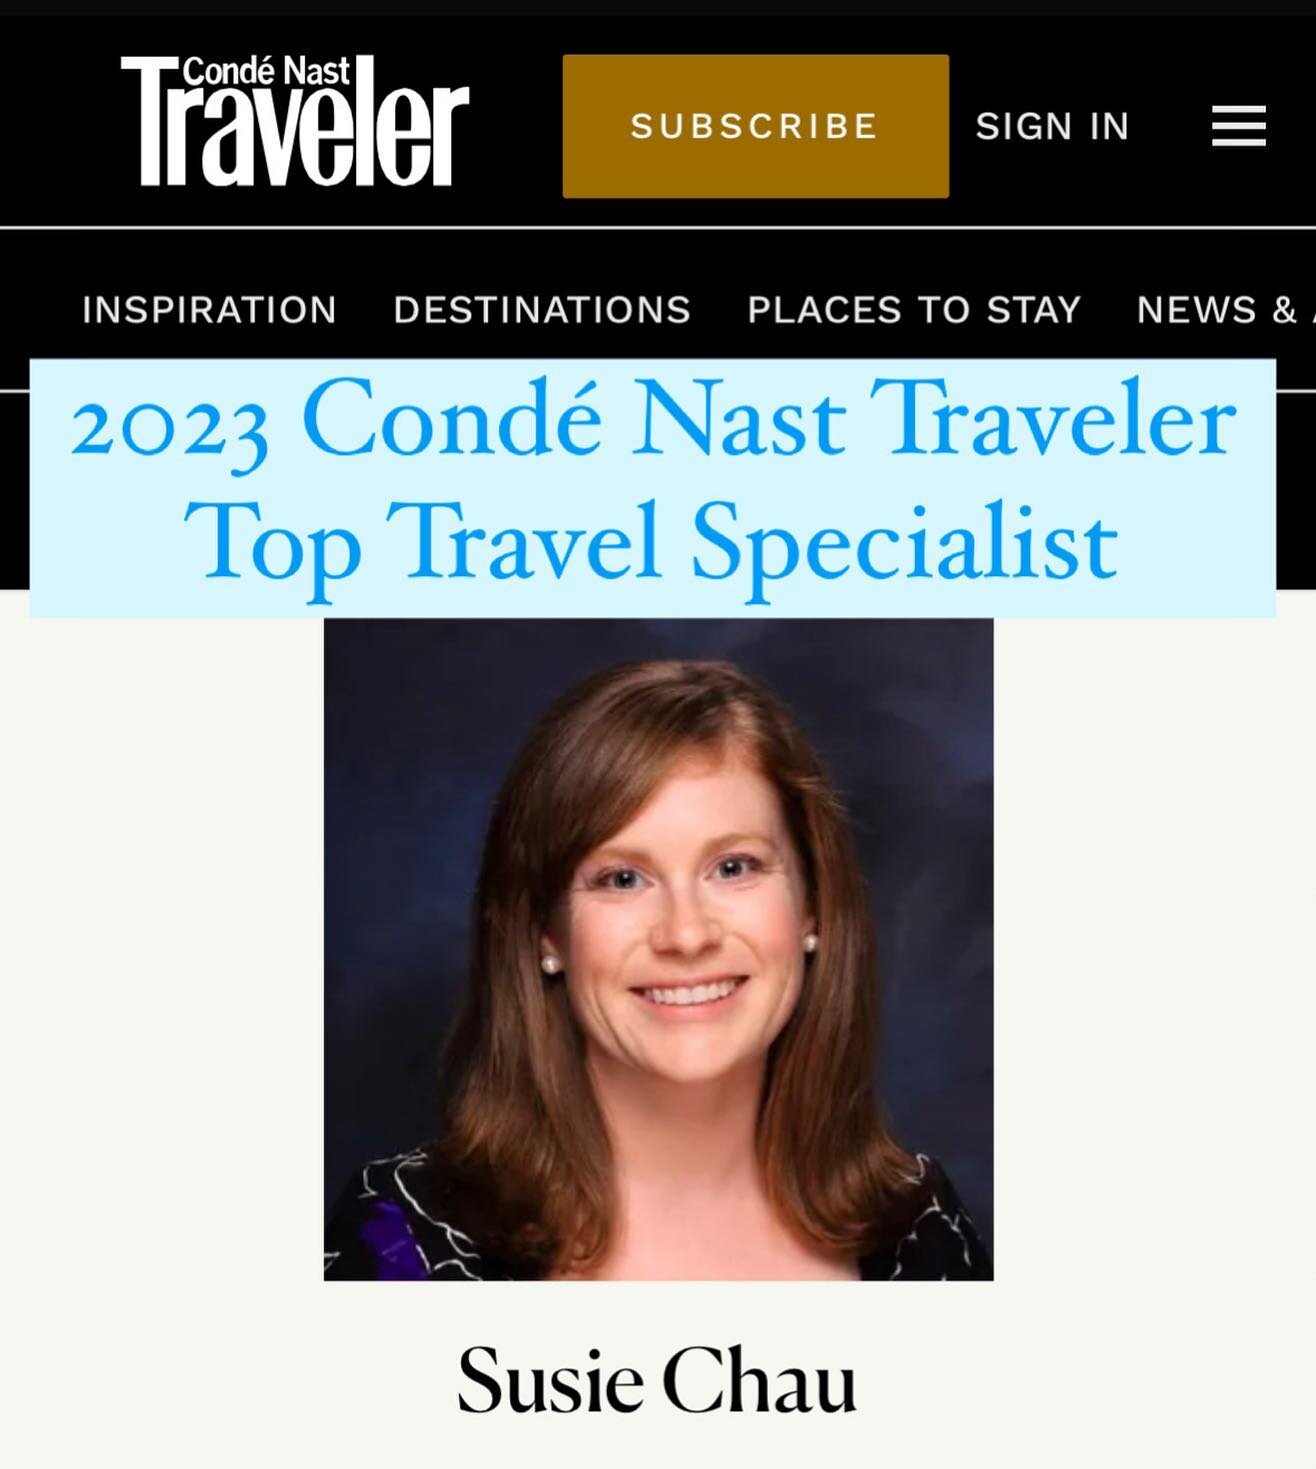 I am very excited to announce that I am a&nbsp;Conde Nast Traveler Top Travel Specialist&nbsp;for 2023!

I feel honored to make the list for the third year in a row.

You can check out my full profile here: https://www.cntraveler.com/contributor/susi